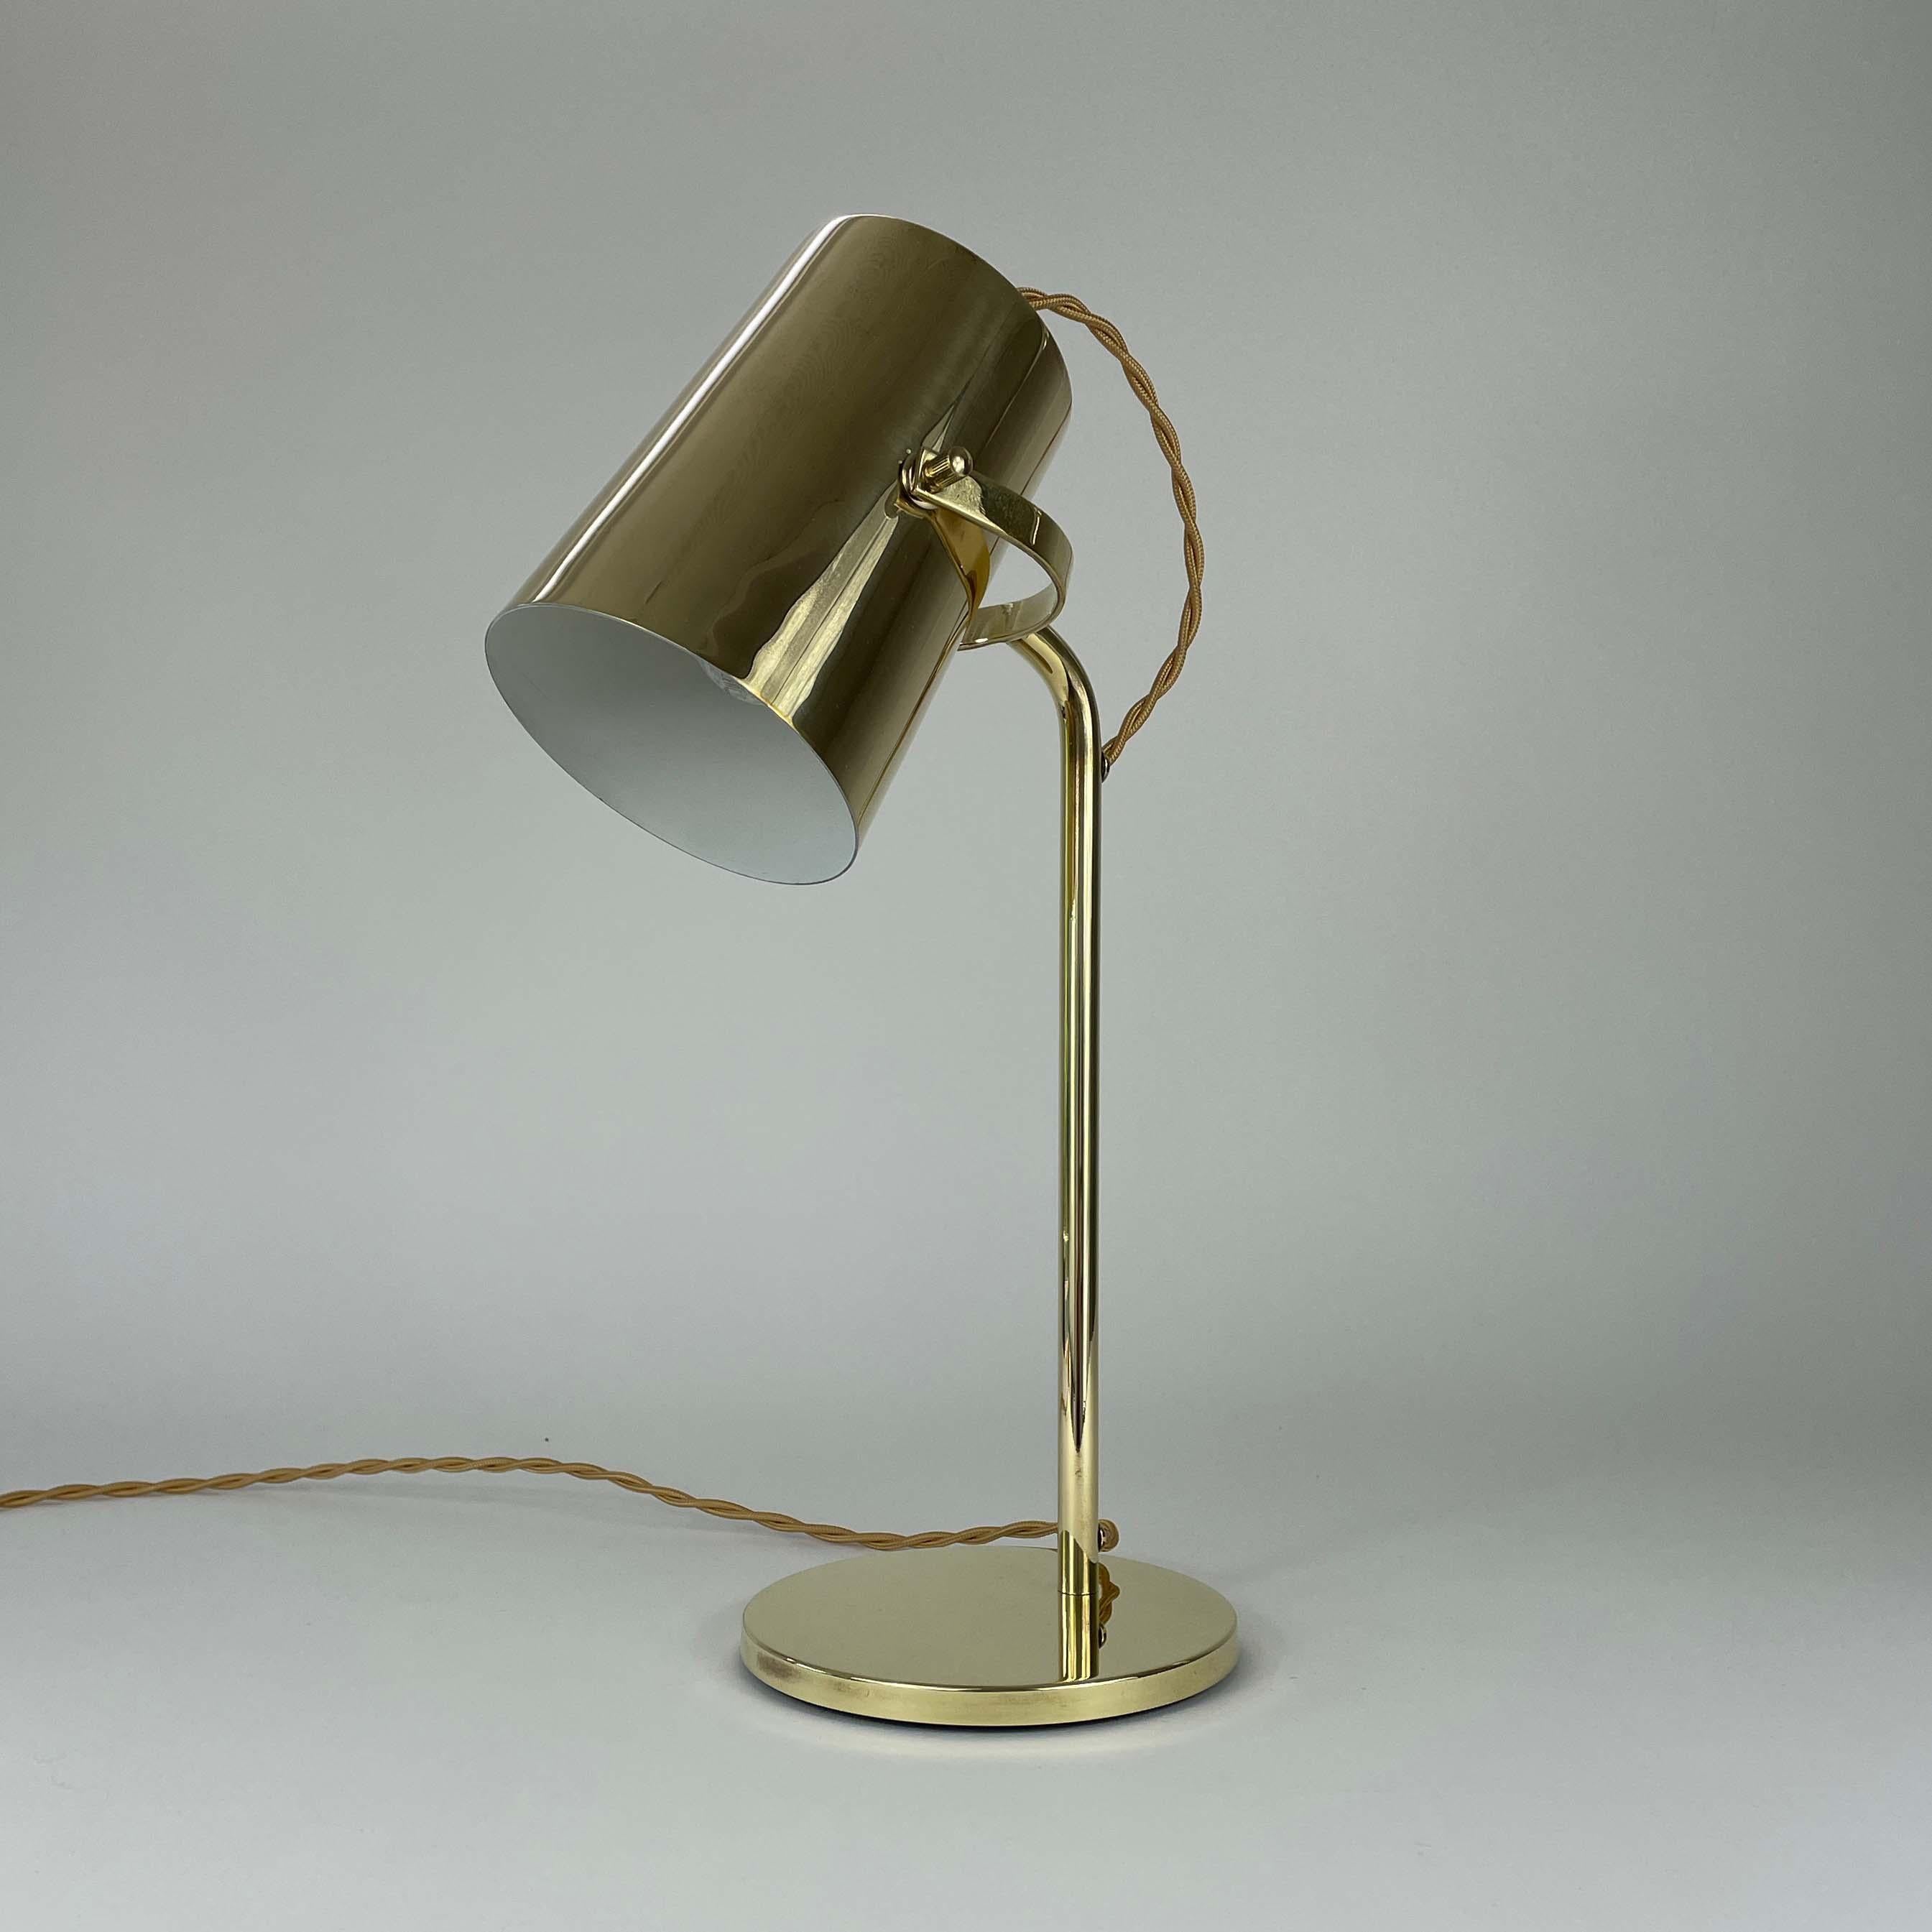 Finnish Paavo Tynell Style Adjustable Brass Table Lamp, Finland 1940s For Sale